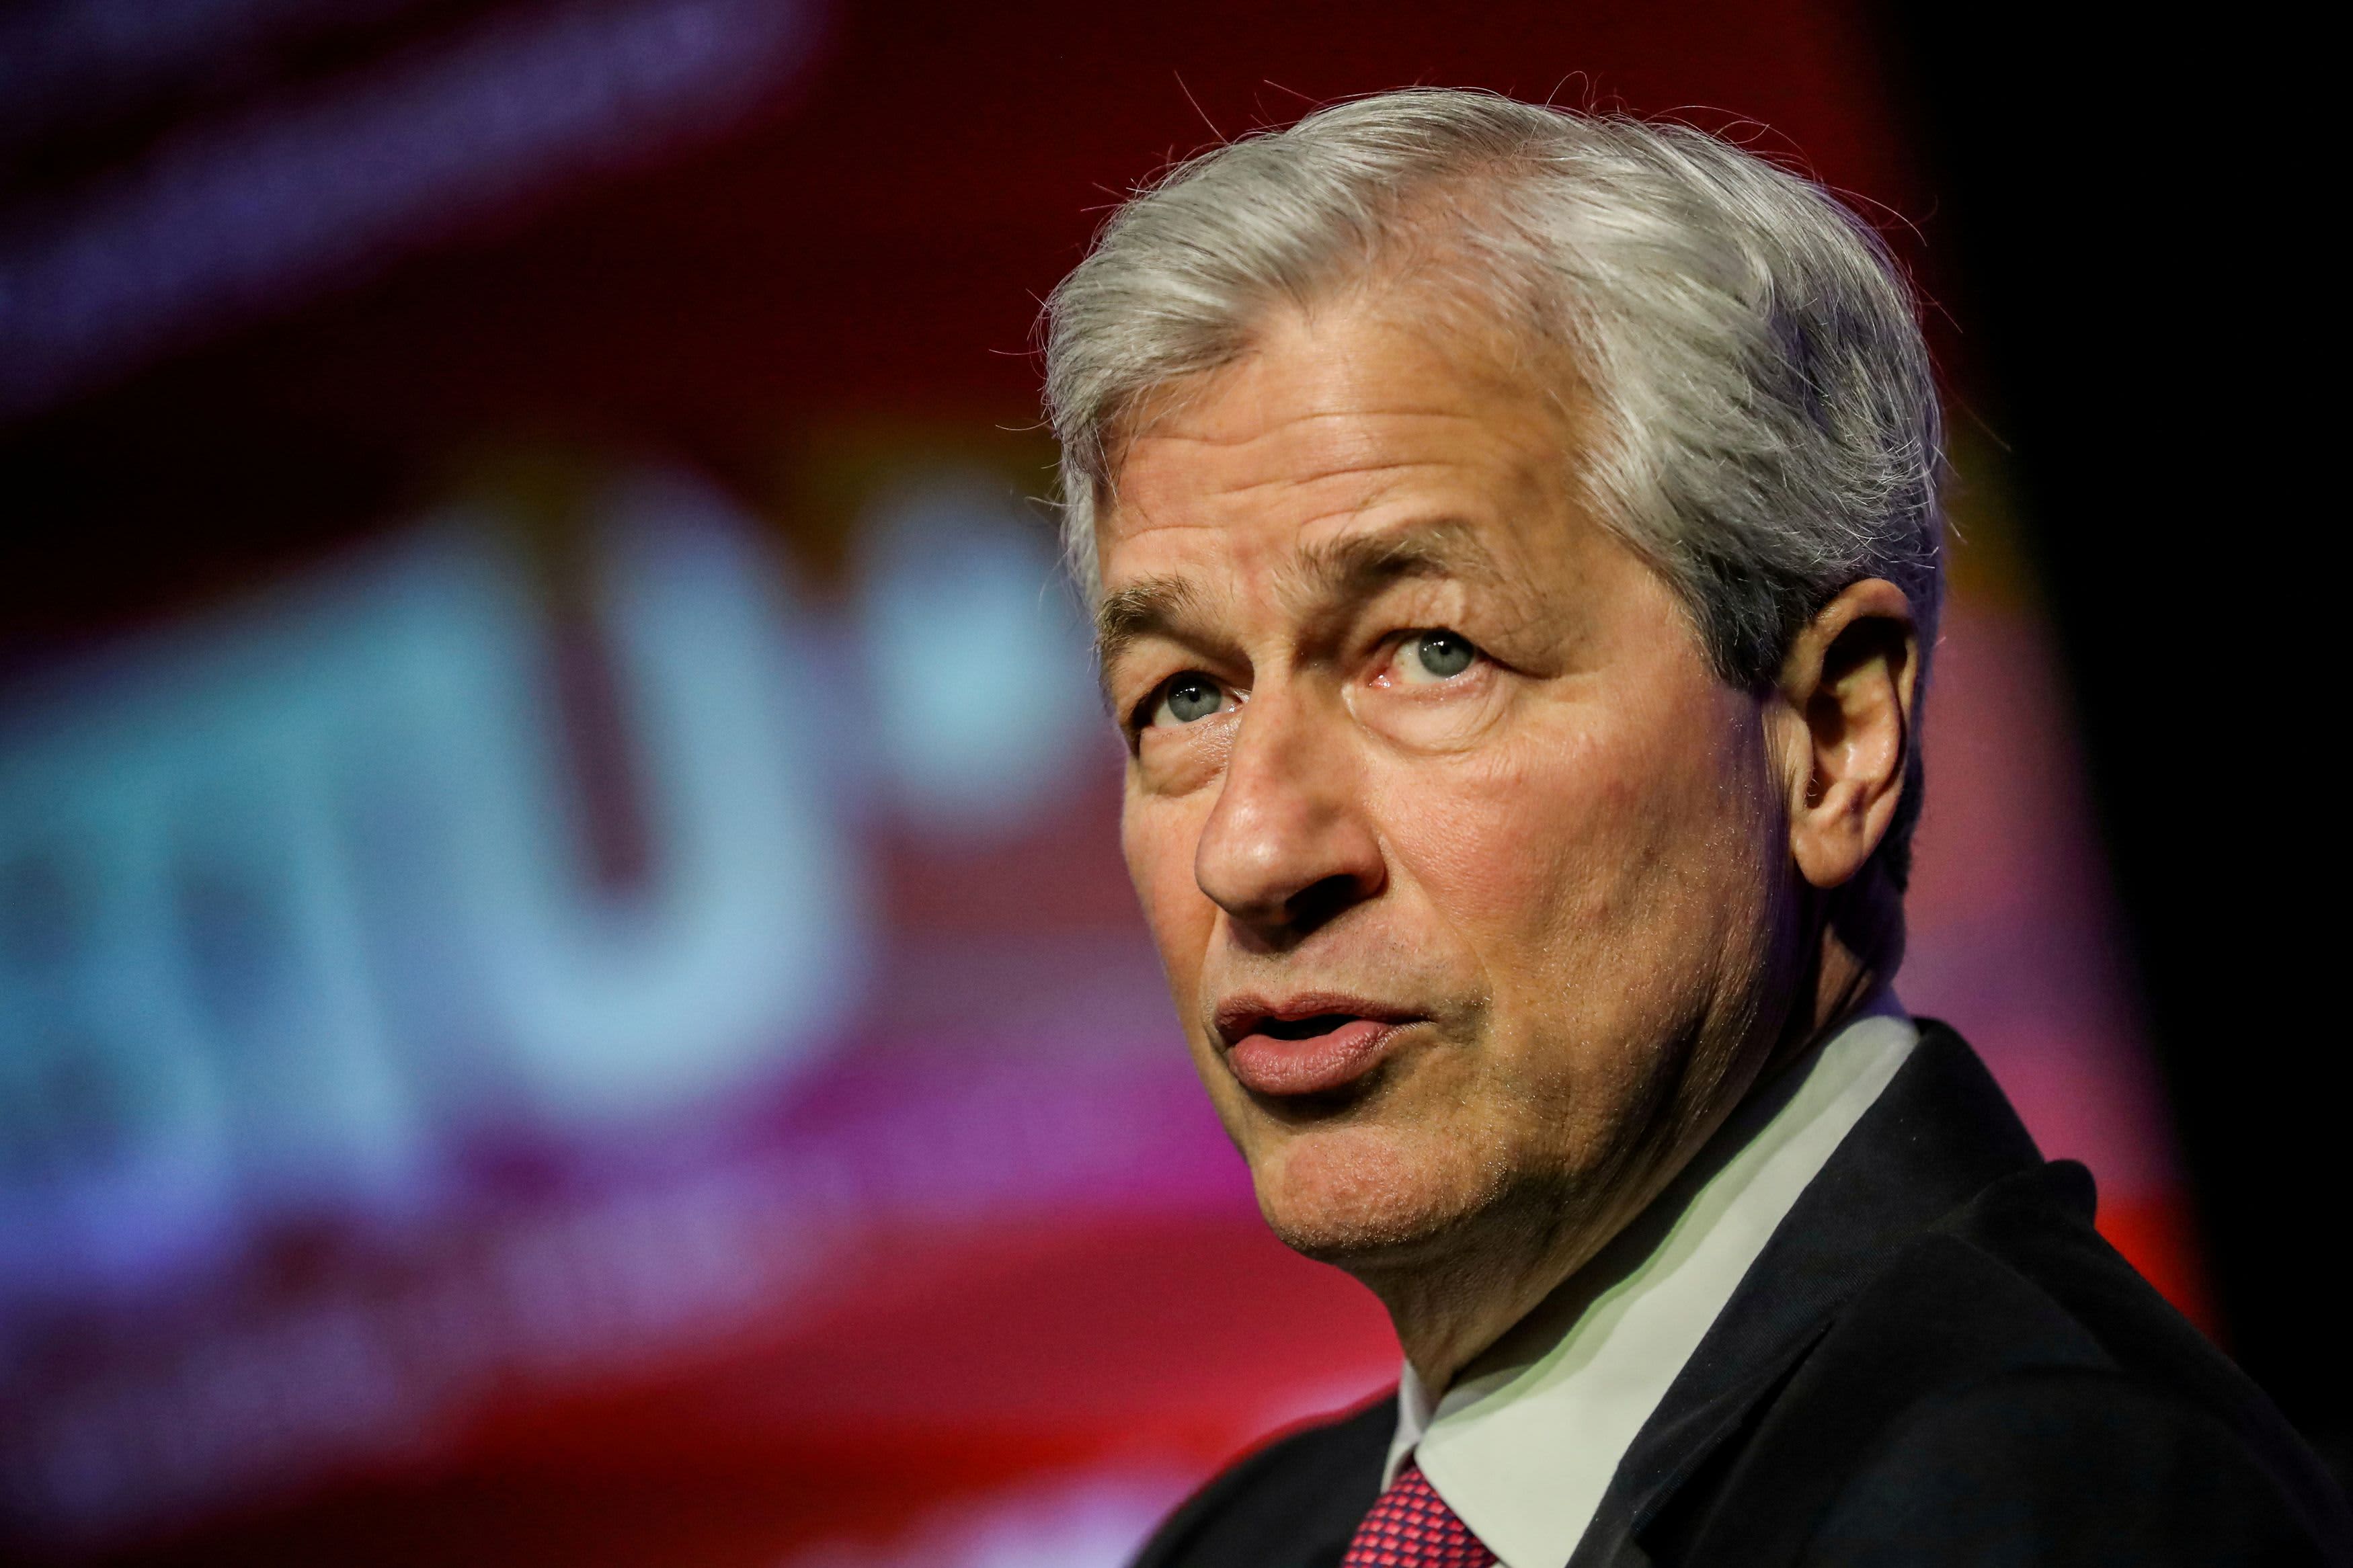 Dimon calls crypto a 'complete sideshow' and says tokens are 'pet rocks'